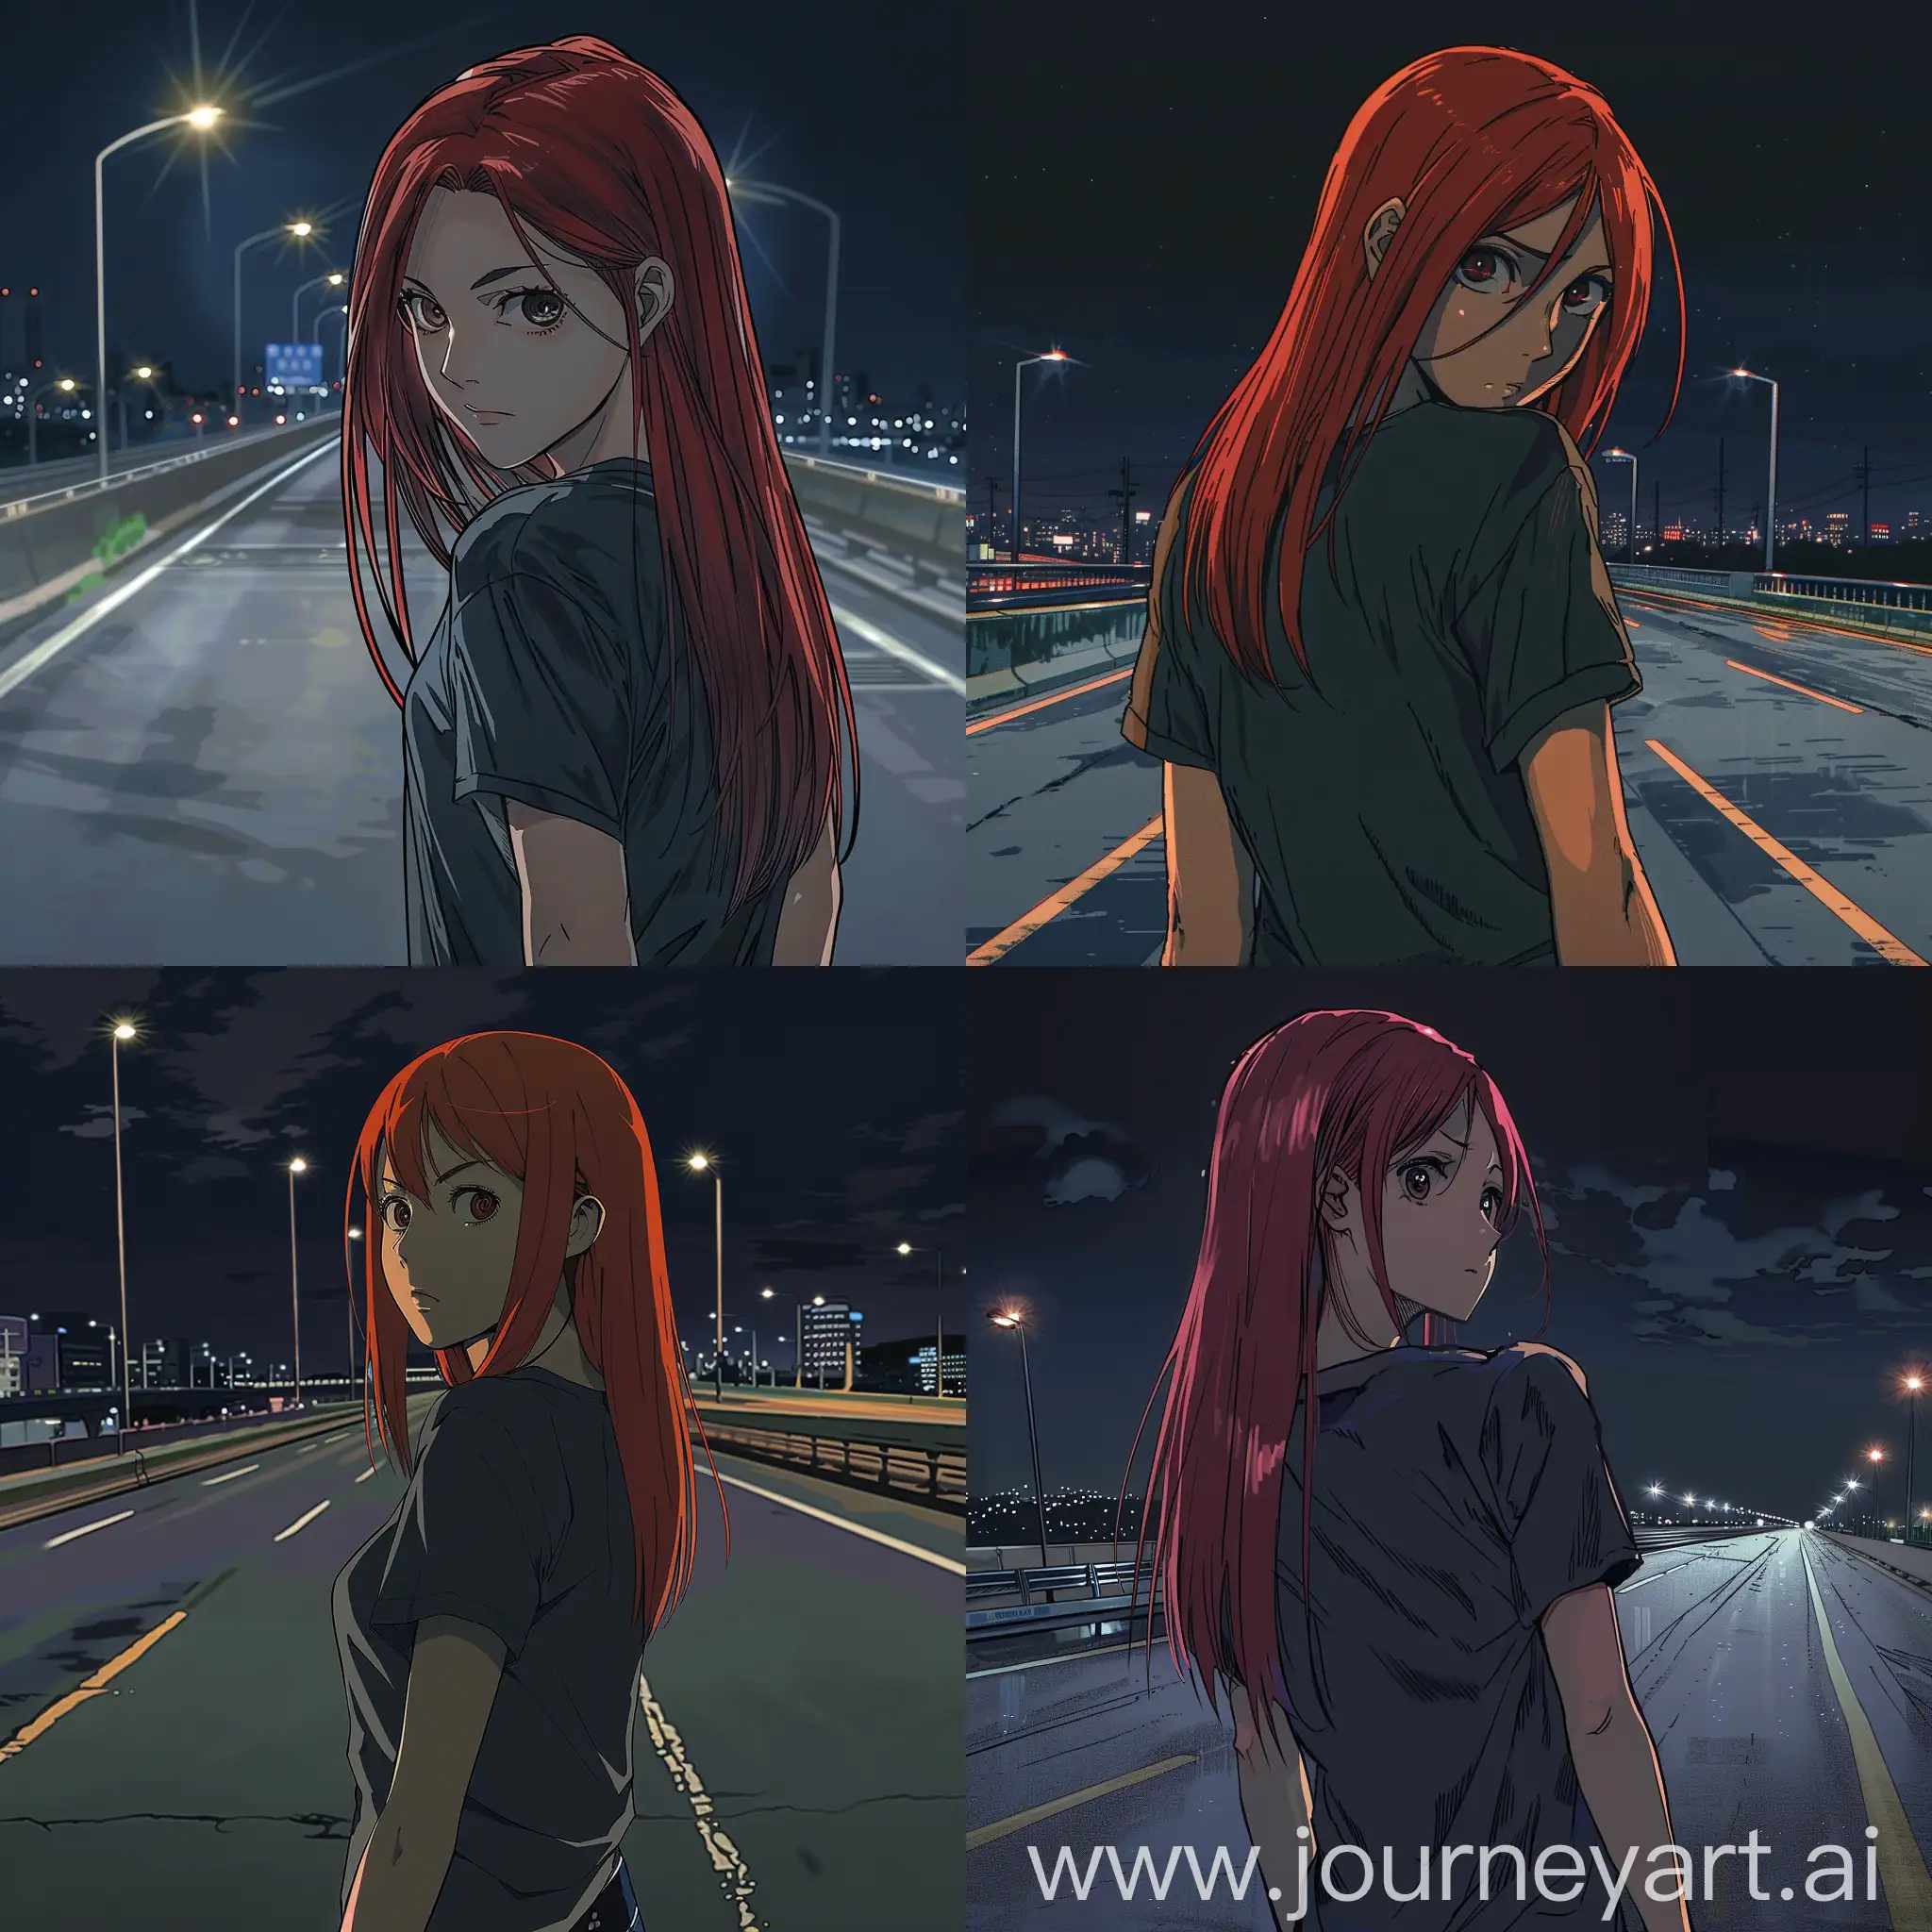 Anime-Drawing-of-RedHaired-Girl-on-City-Highway-at-Night